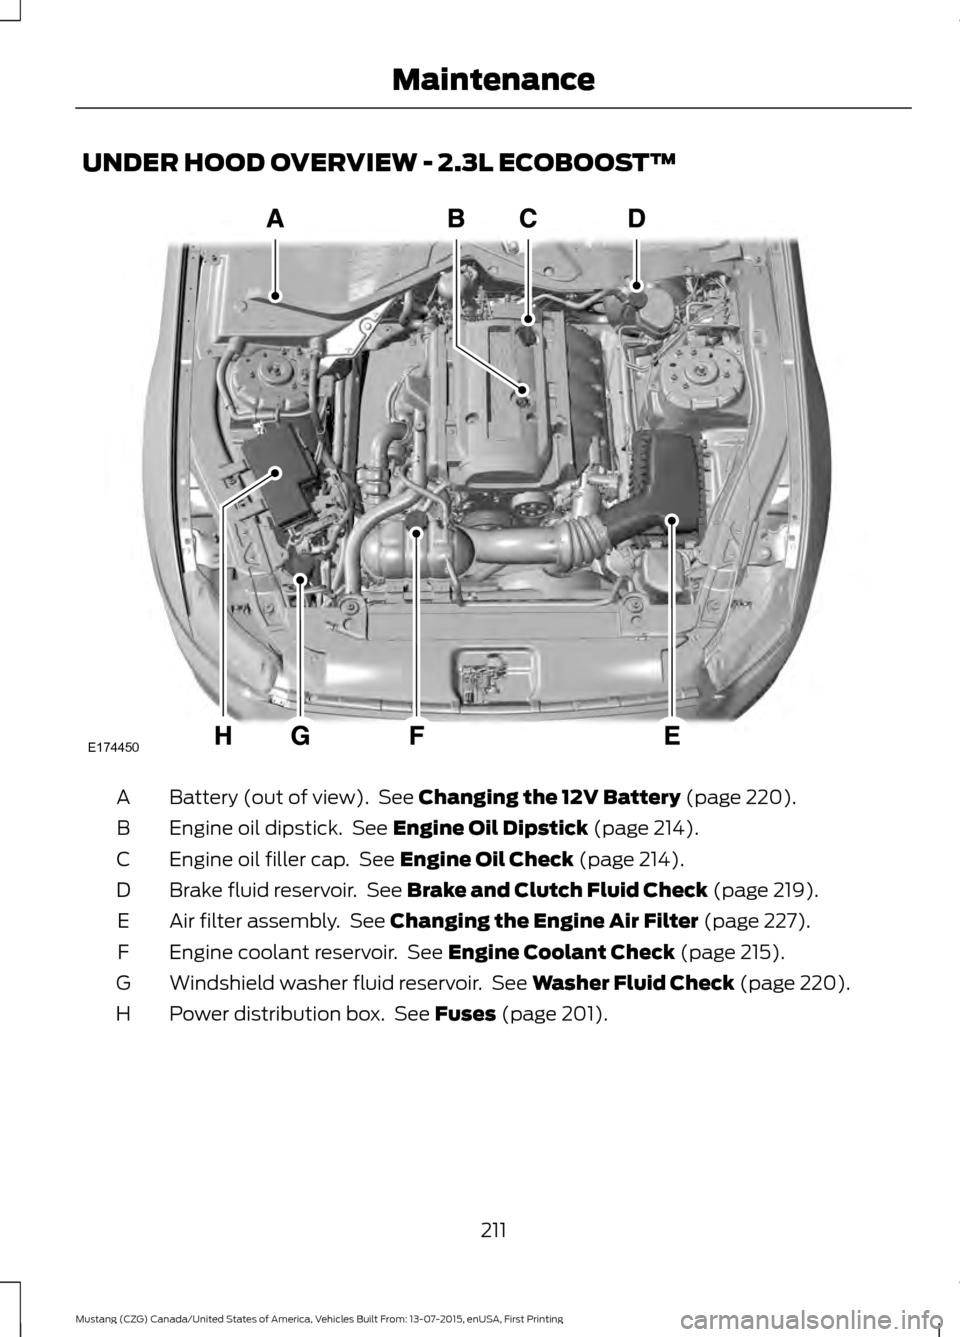 FORD MUSTANG 2016 6.G Owners Guide UNDER HOOD OVERVIEW - 2.3L ECOBOOST™
Battery (out of view).  See Changing the 12V Battery (page 220).
A
Engine oil dipstick.  See 
Engine Oil Dipstick (page 214).
B
Engine oil filler cap.  See 
Engi